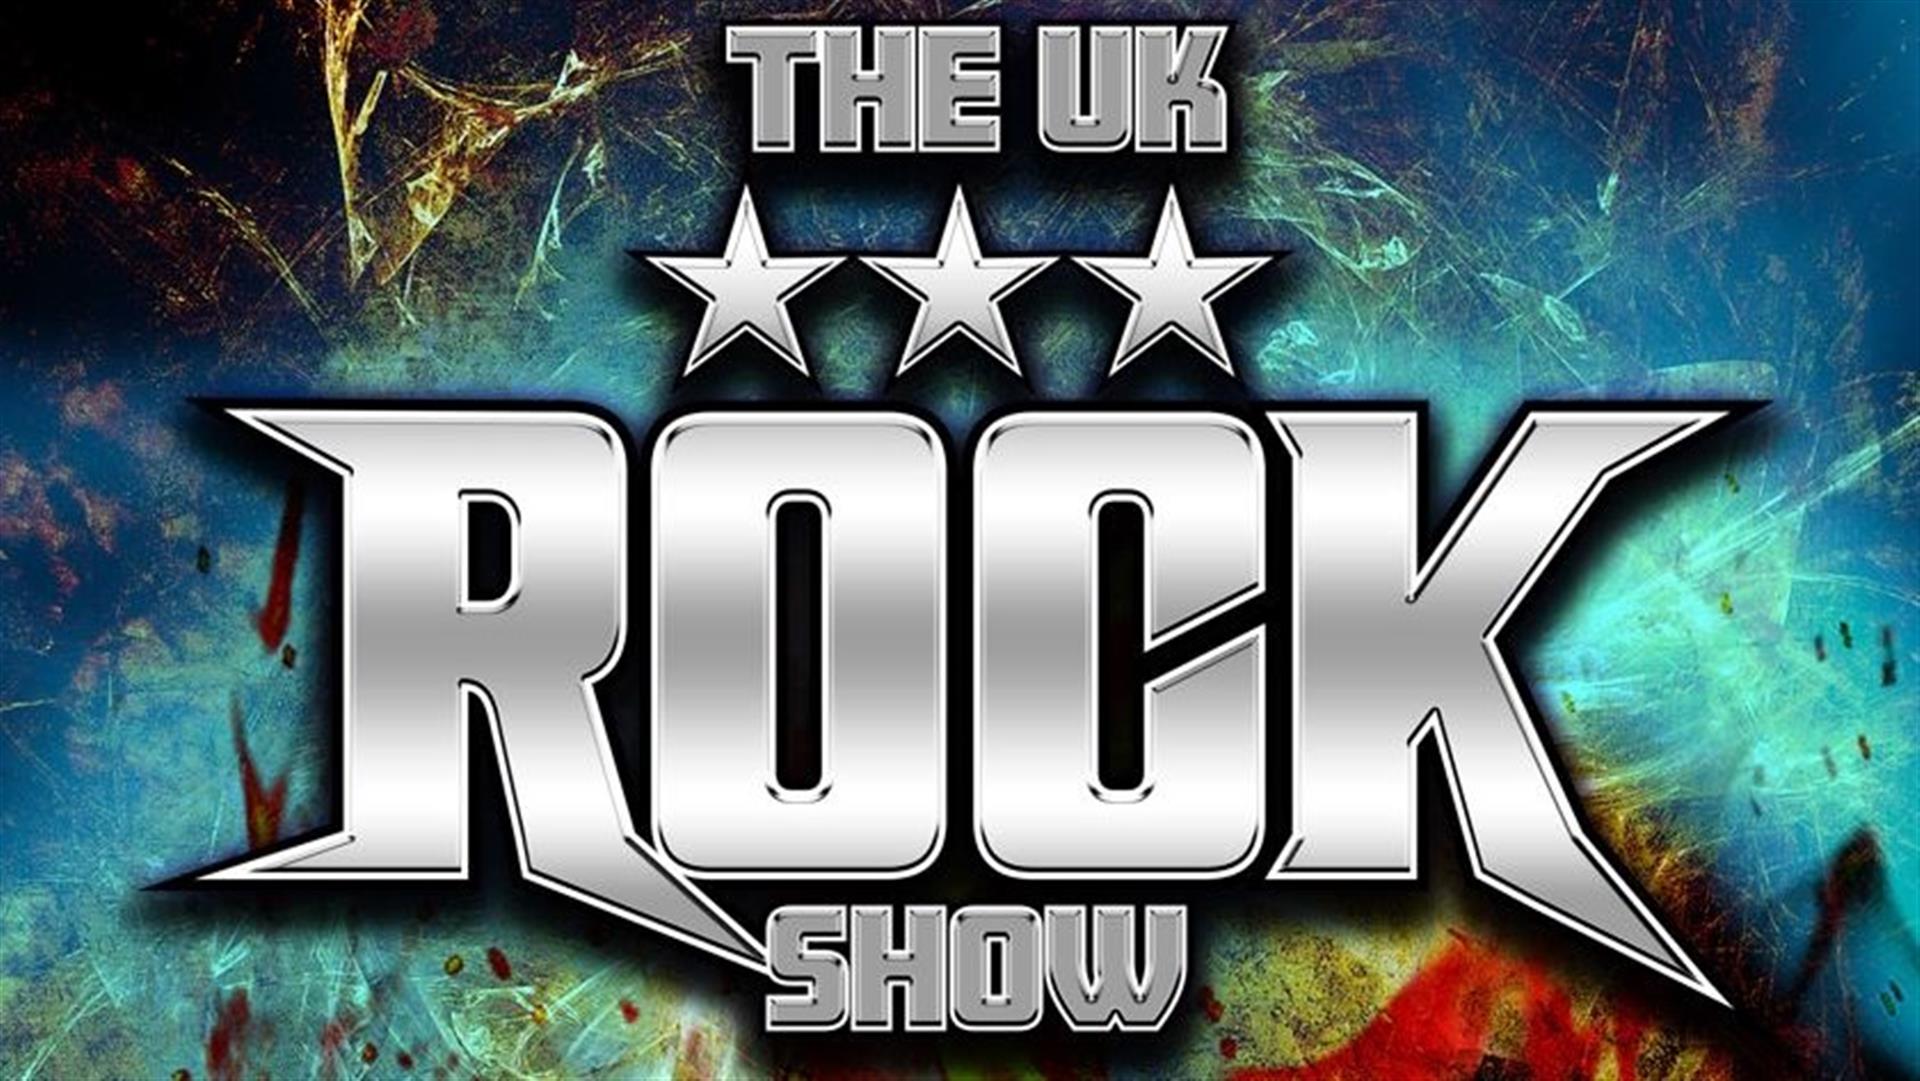 The UK Rock Show - Lowther Pavilion